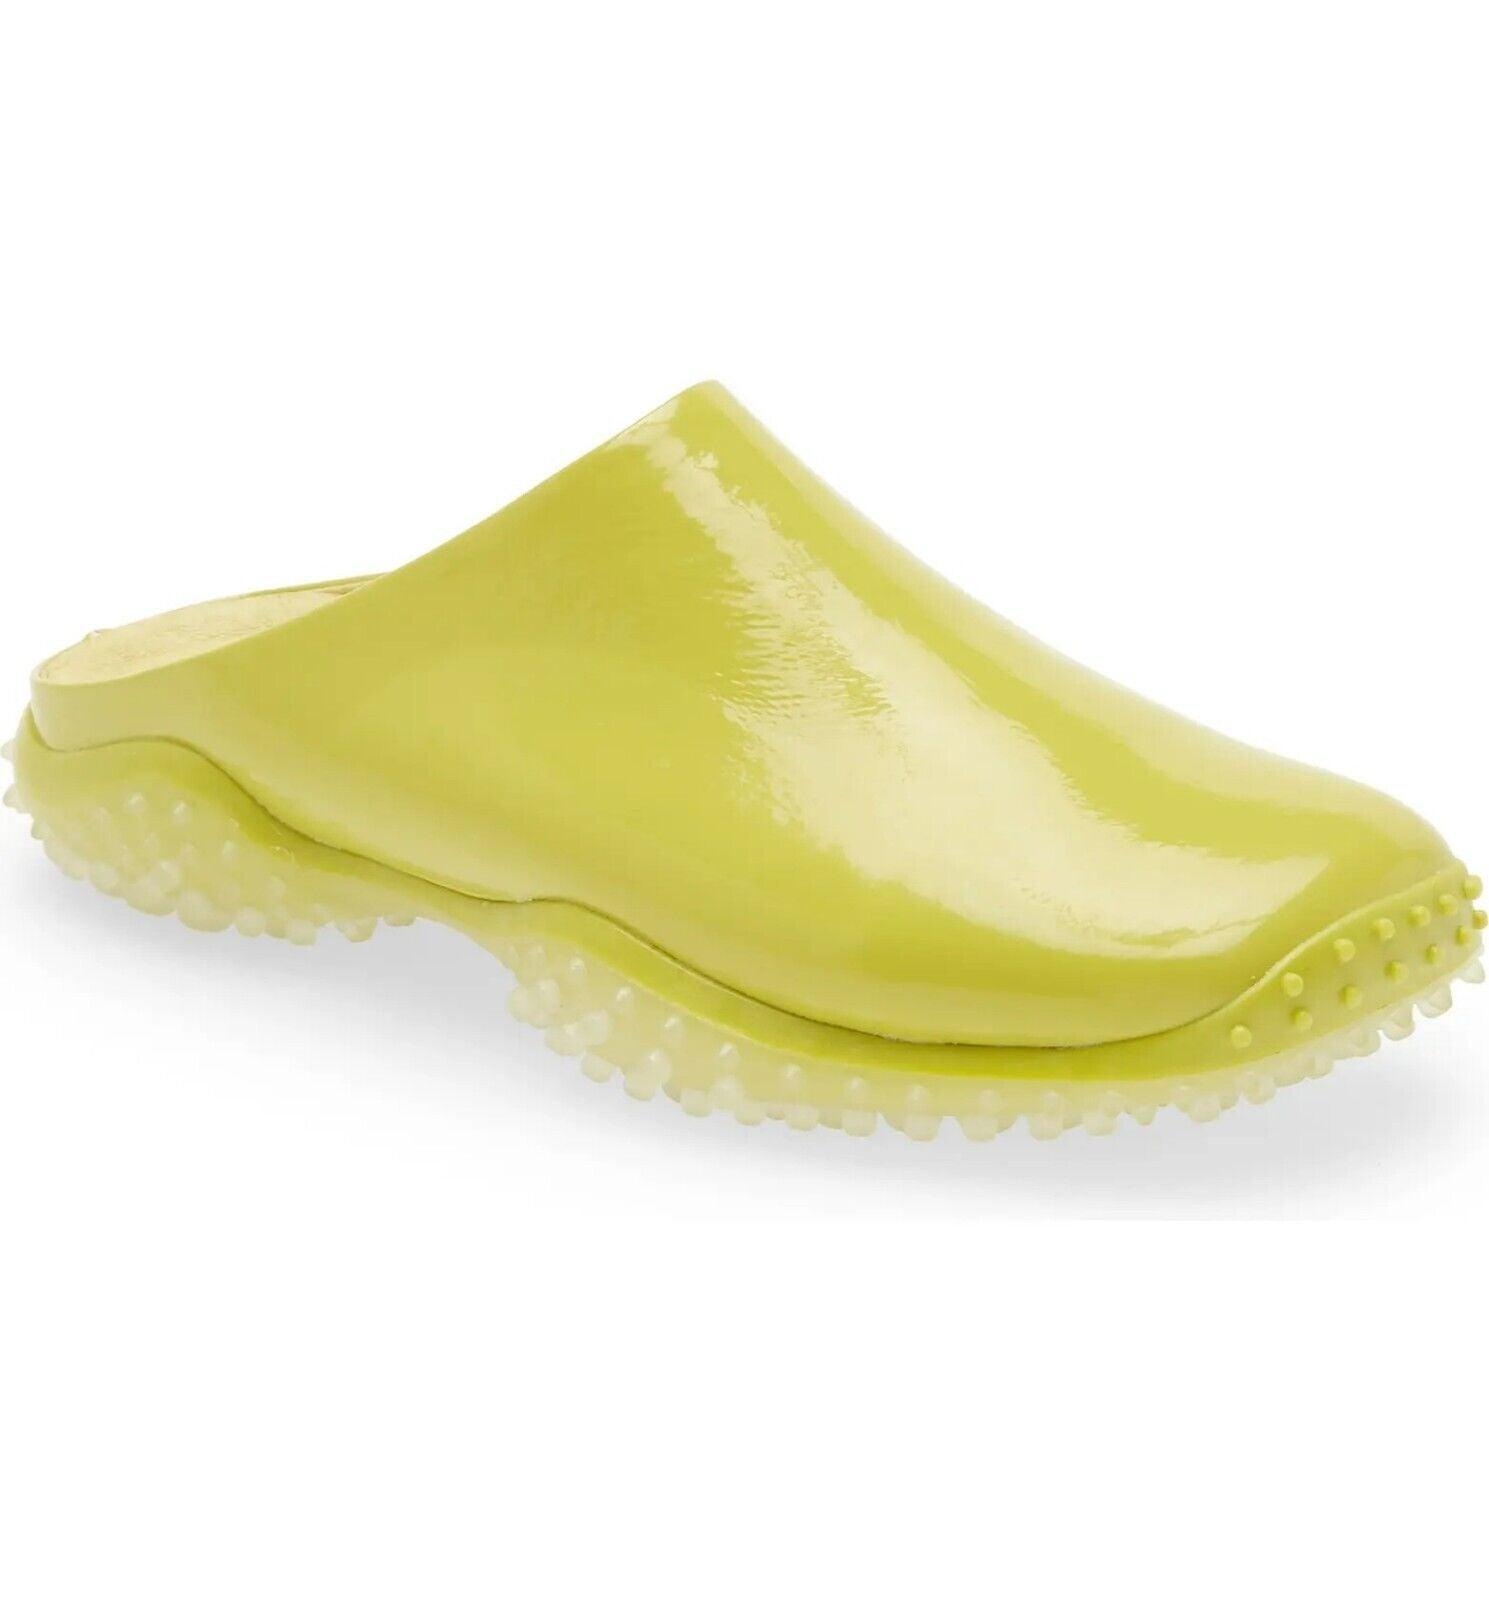 Jeffrey Campbell Lightyear Clog Mules Chartreuse Faux Patent Leather Size US 6.5 - SVNYFancy